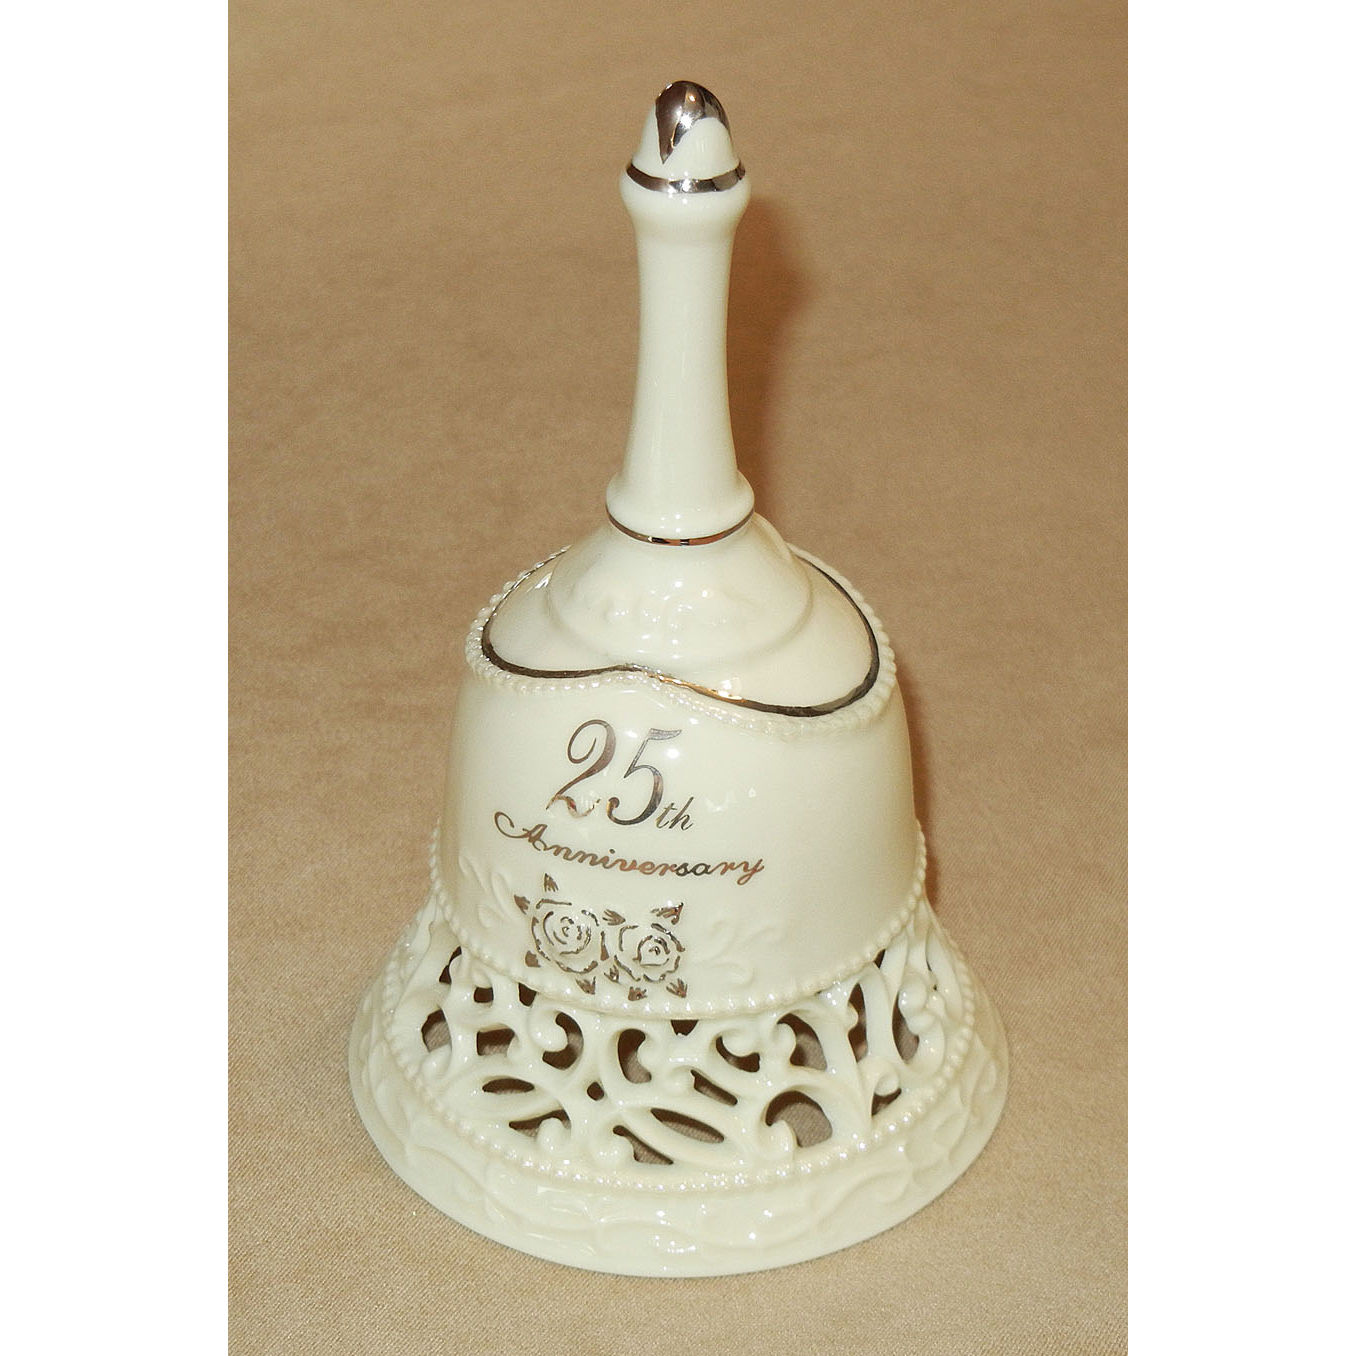 Porcelain Anniversary Gifts
 25th Anniversary Gifts Porcelain Bell